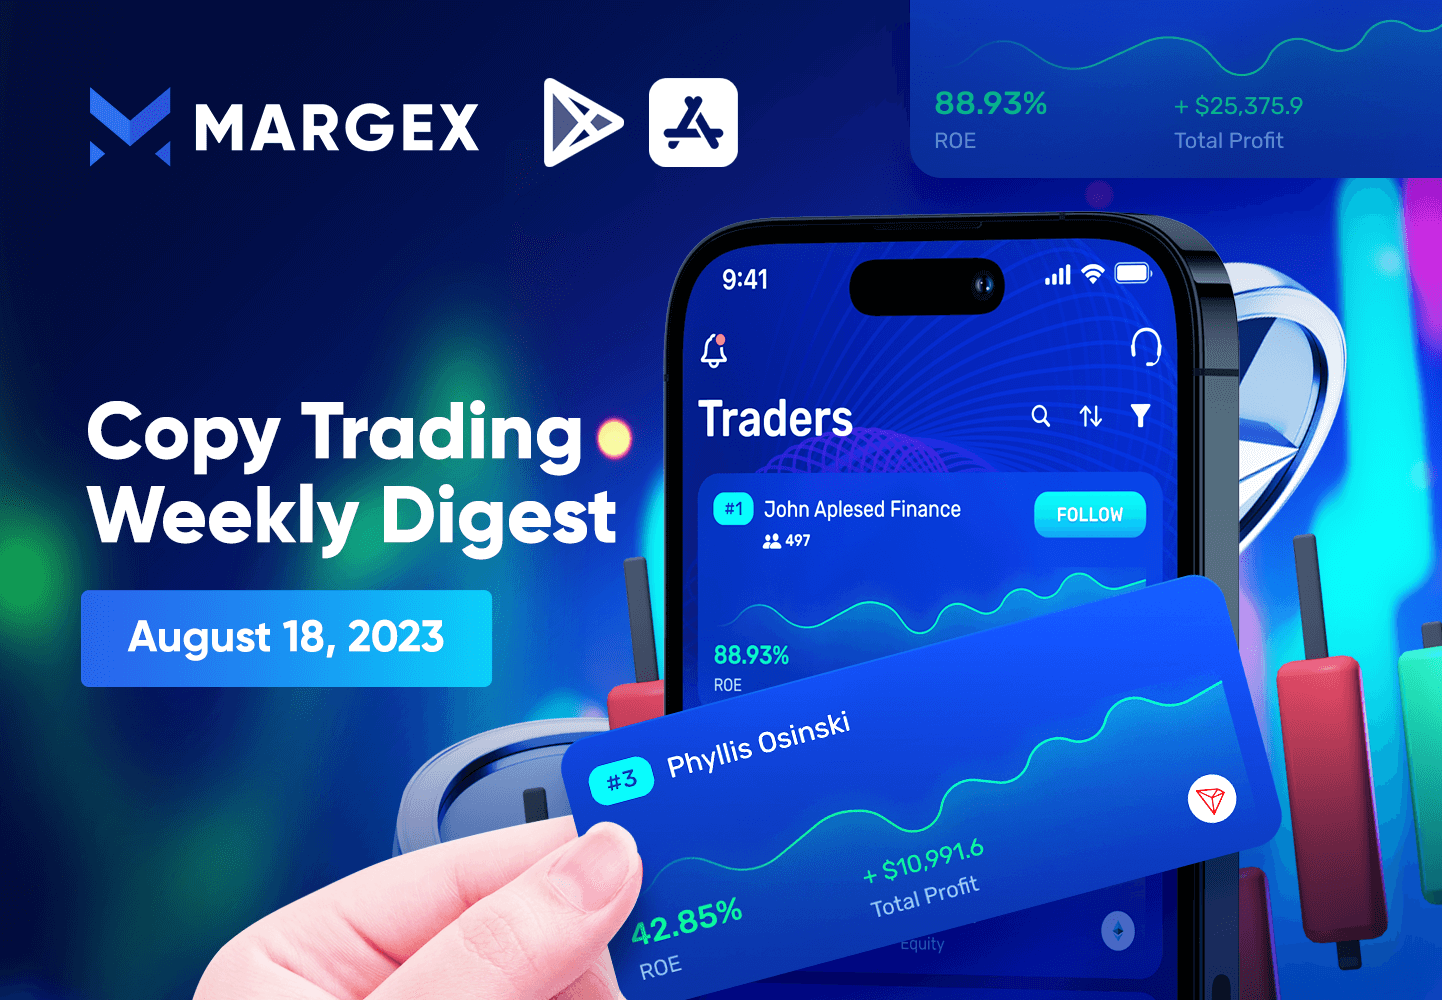 Copy Trading Weekly Digest August 18, 2023